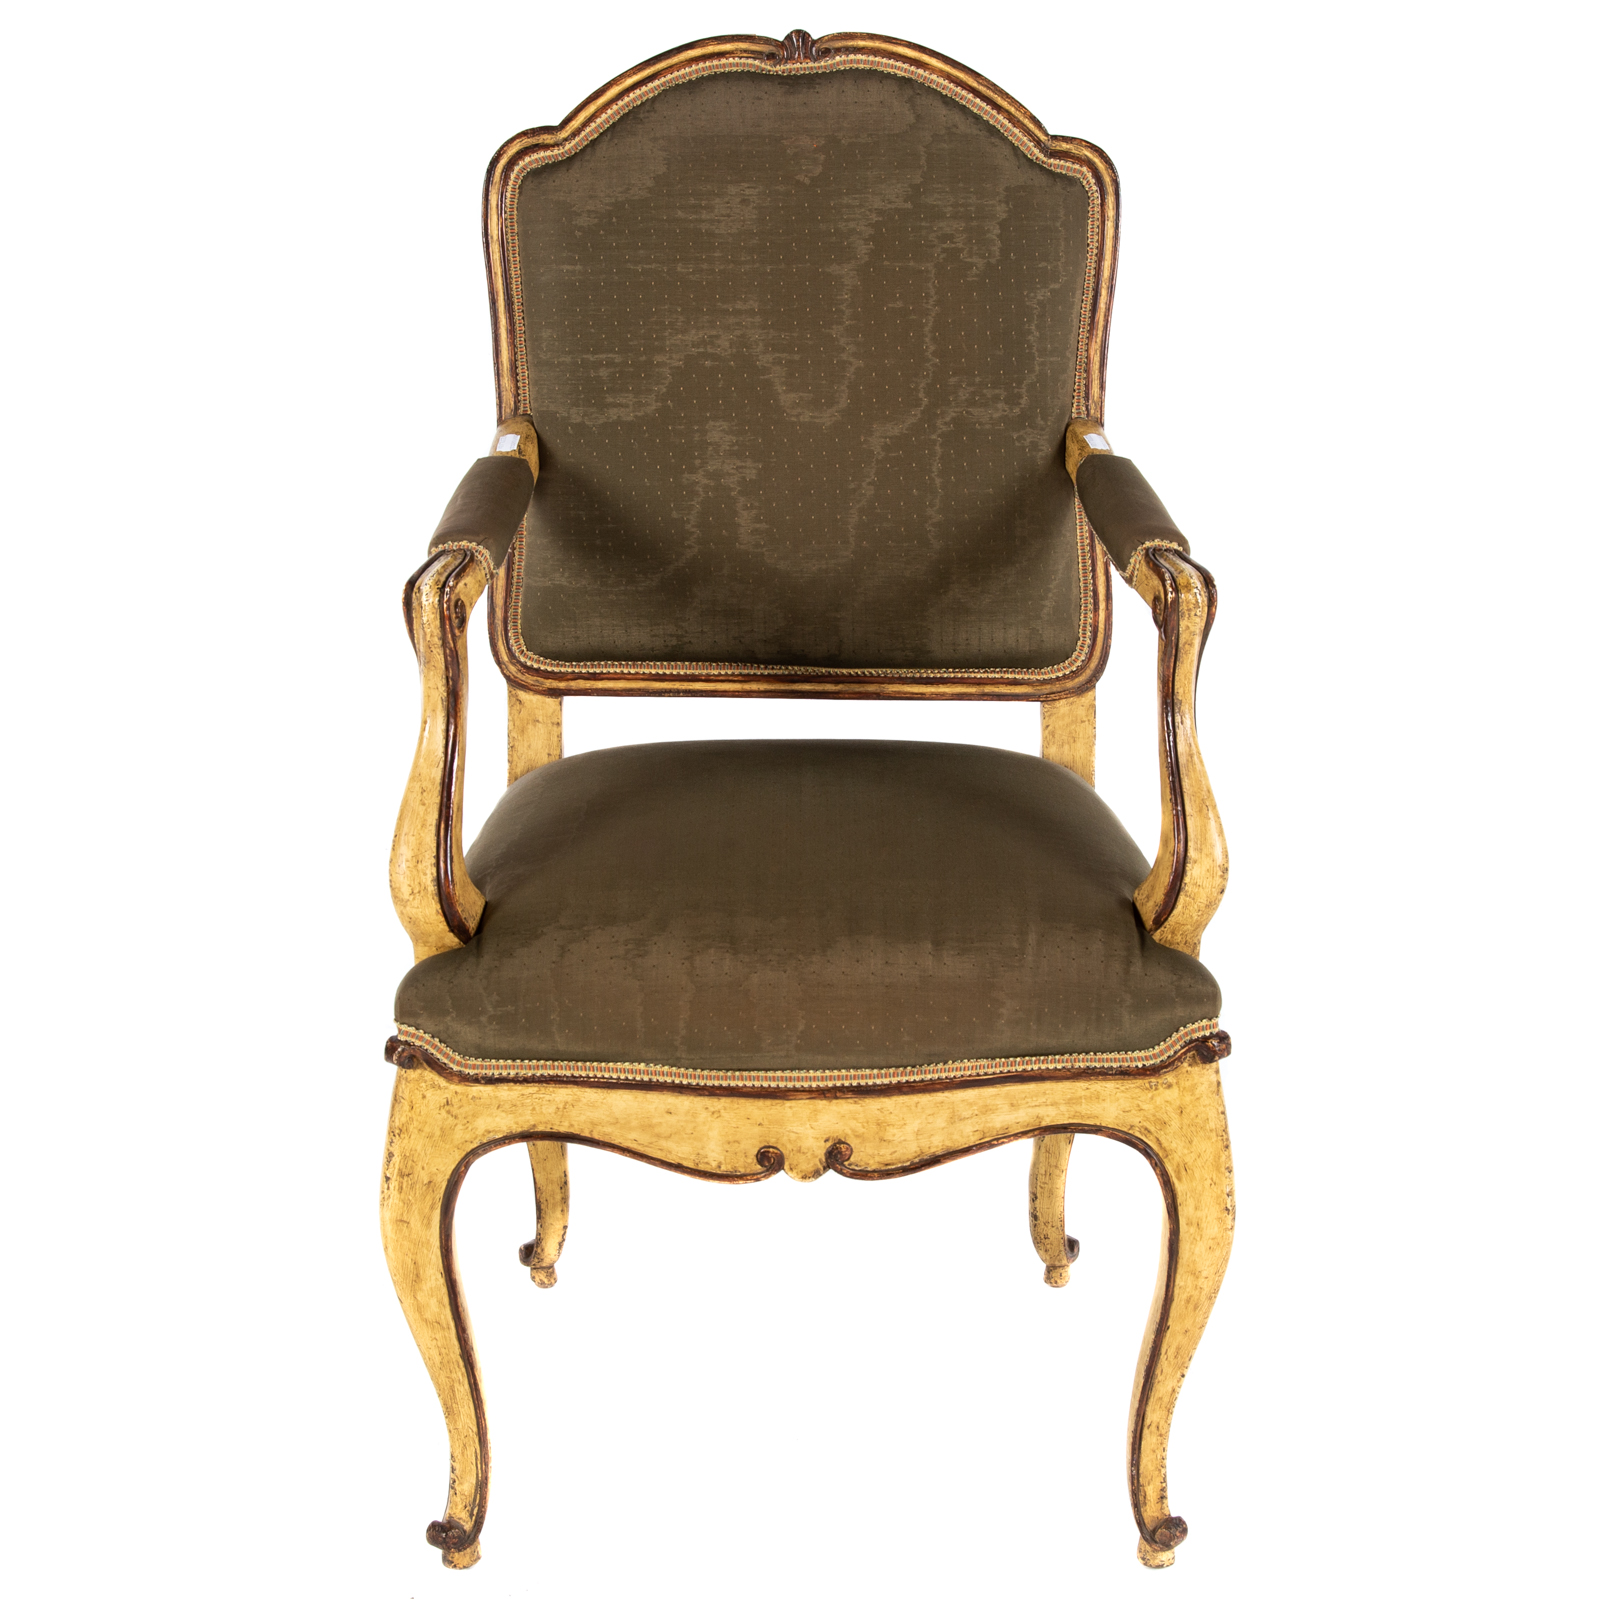 LOUIS XV STYLE PAINTED WOOD CHAIR 3b28e7